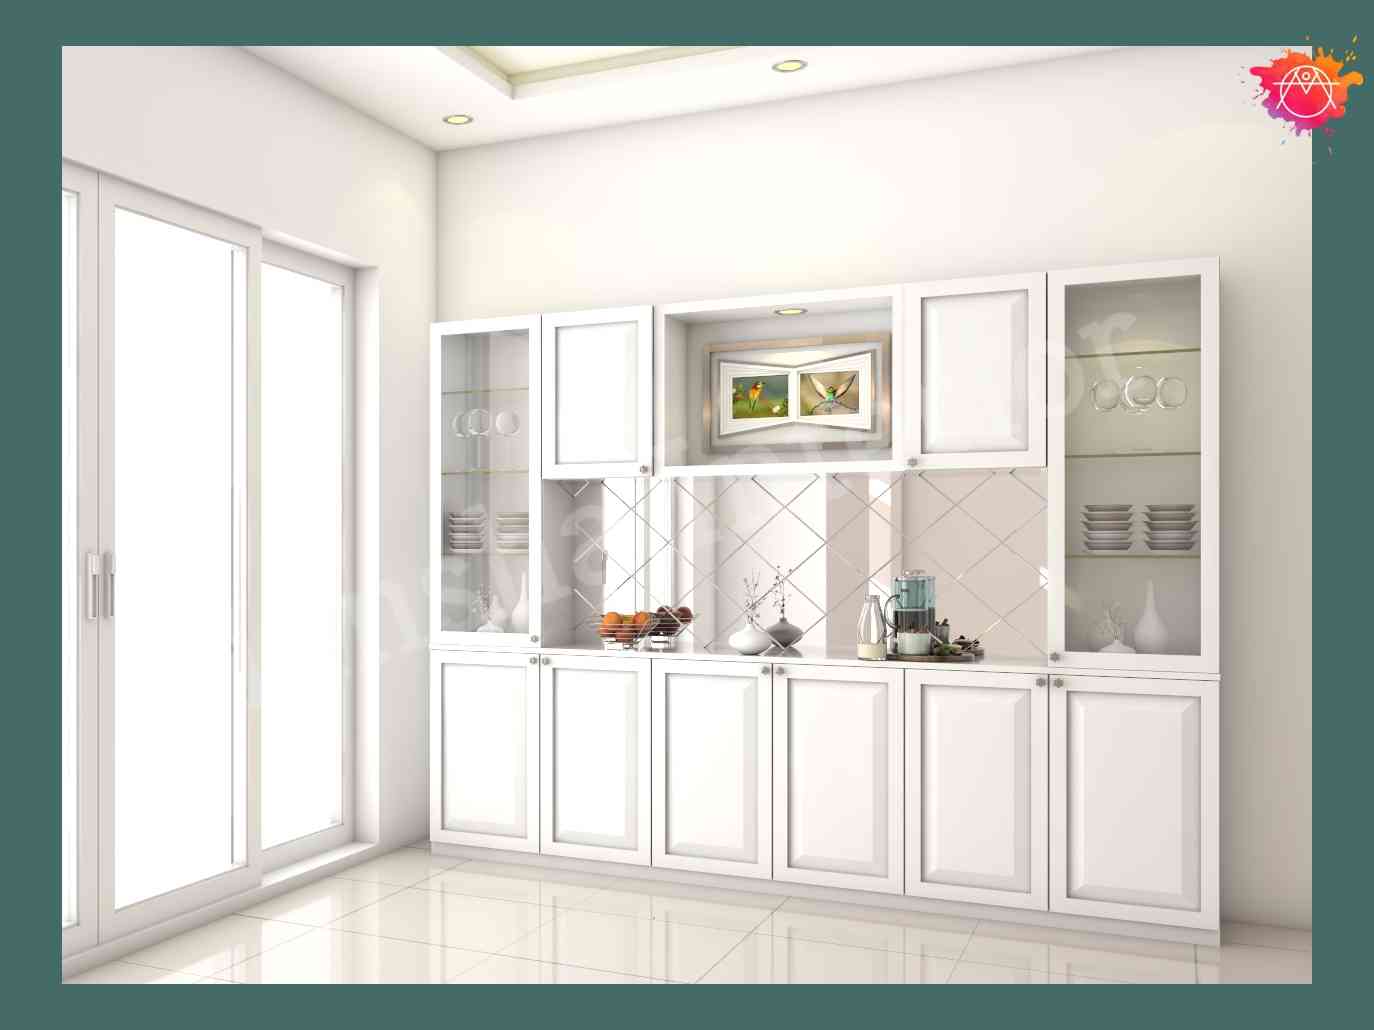 Kitchen Crockery Unit With Off White Cabinets And Loft Storage